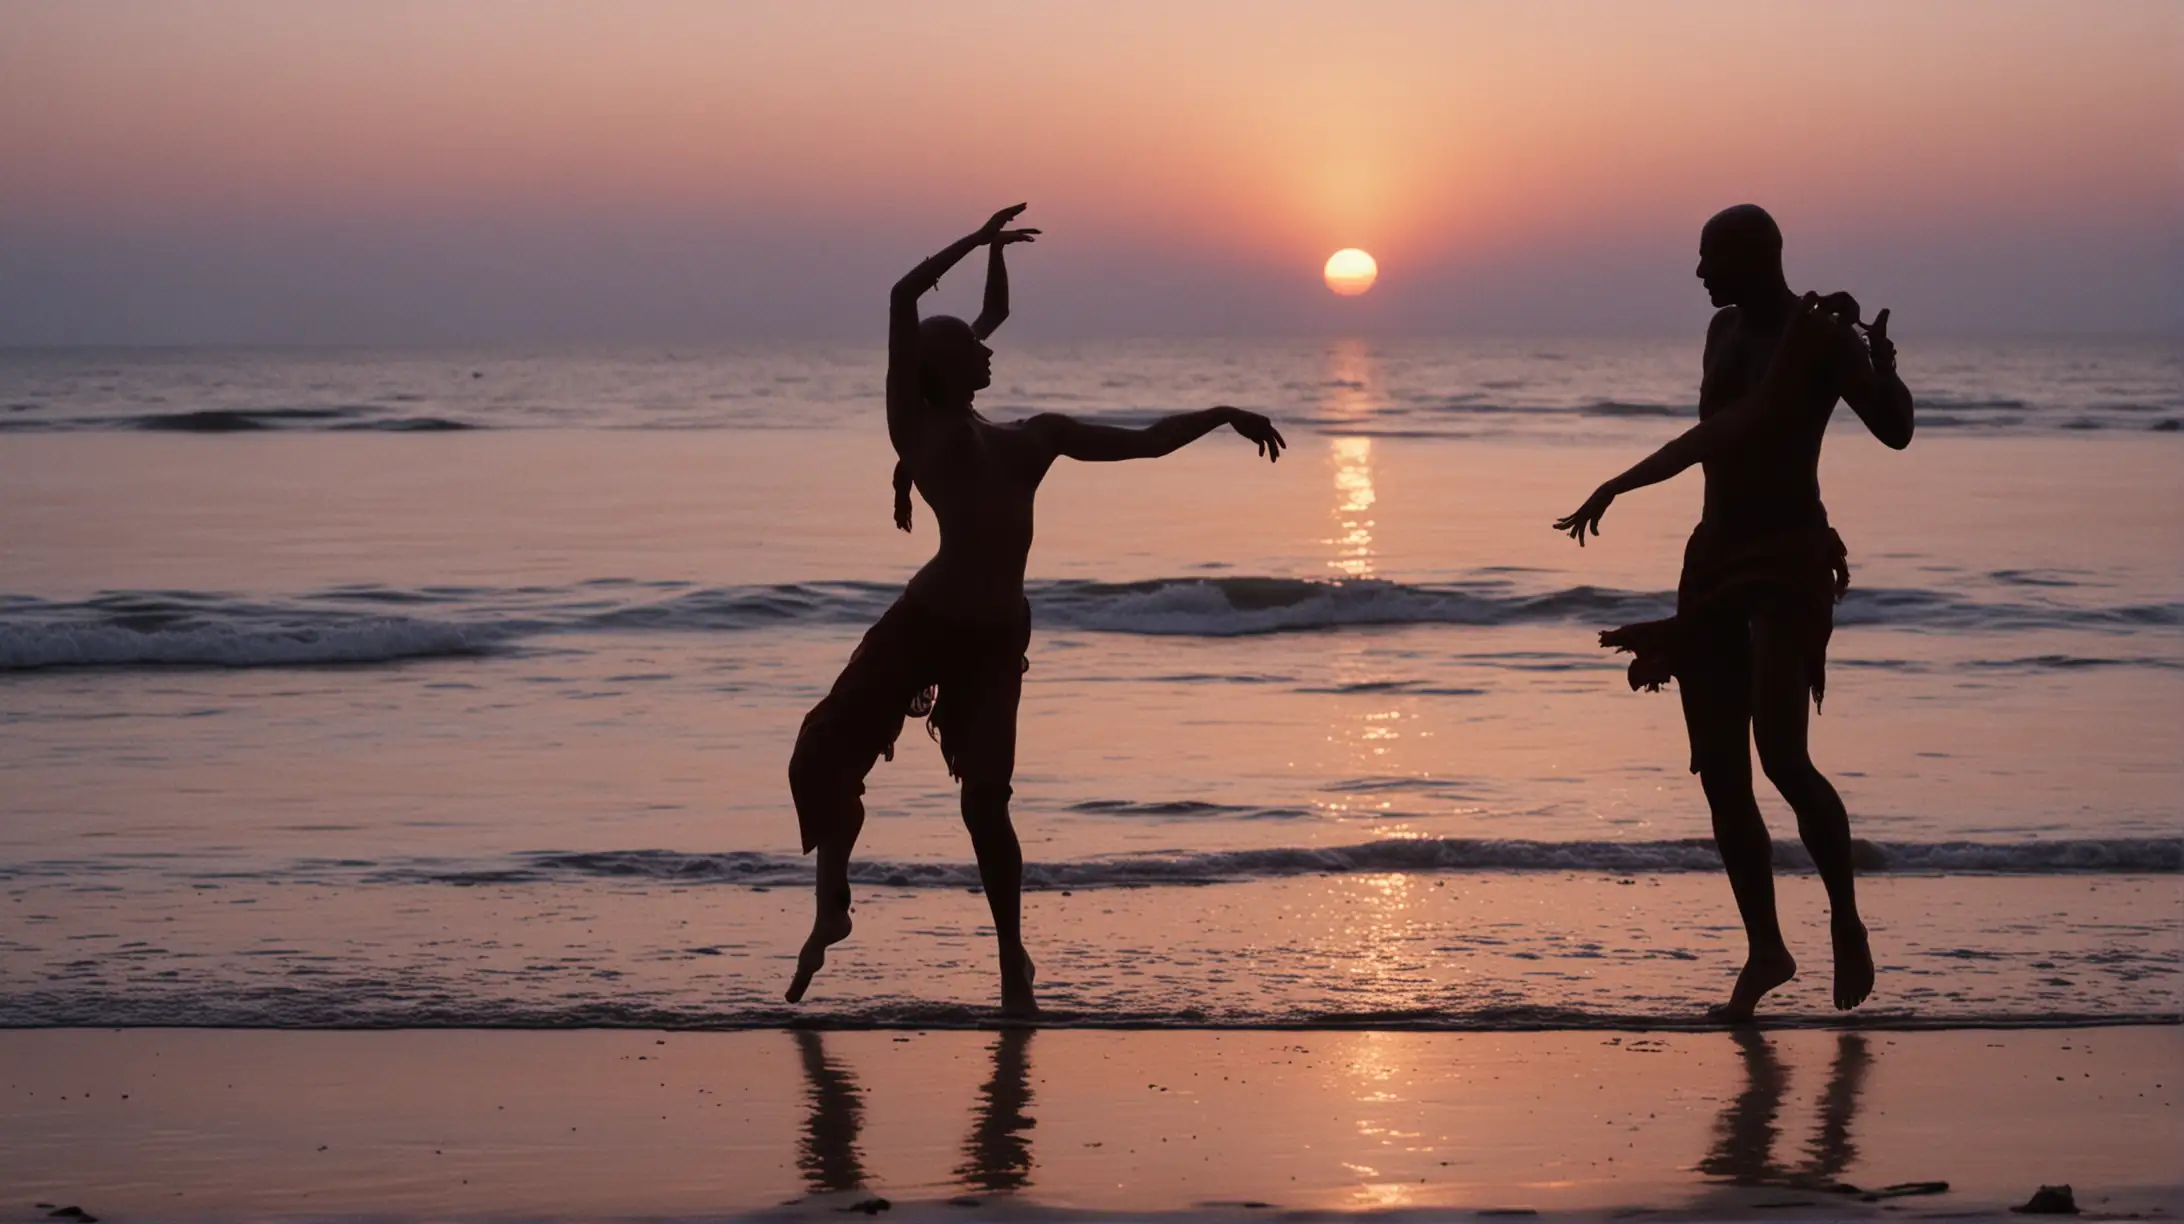 silhouettes of man and women dancing on an exotic beach at dusk, one of the men is bald